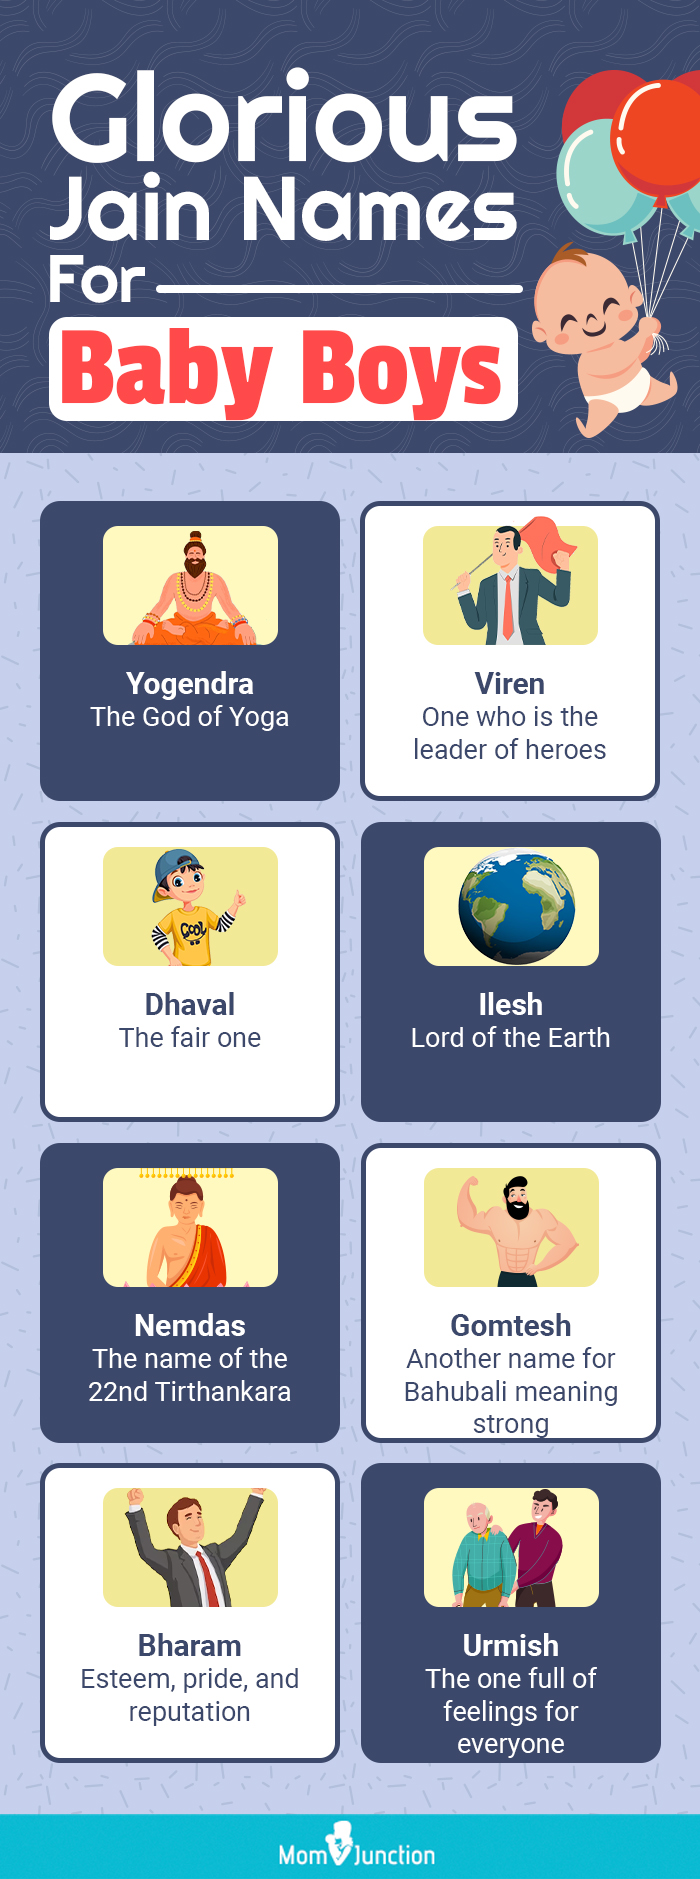 glorious jain names for baby boys (infographic)